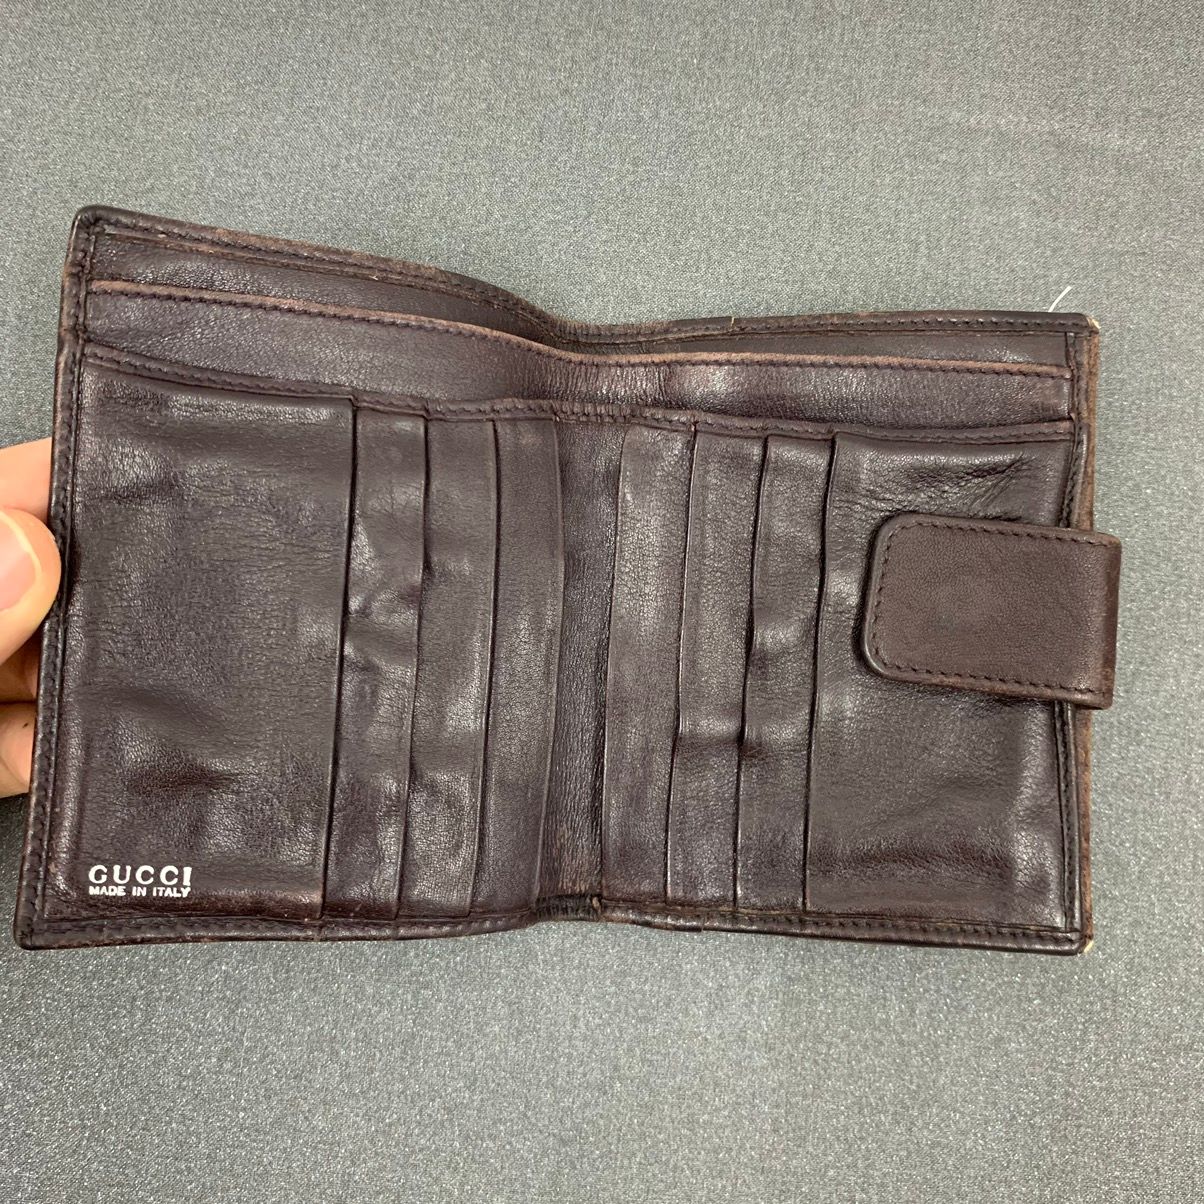 Thrashed Gucci Leather Wallet - 4